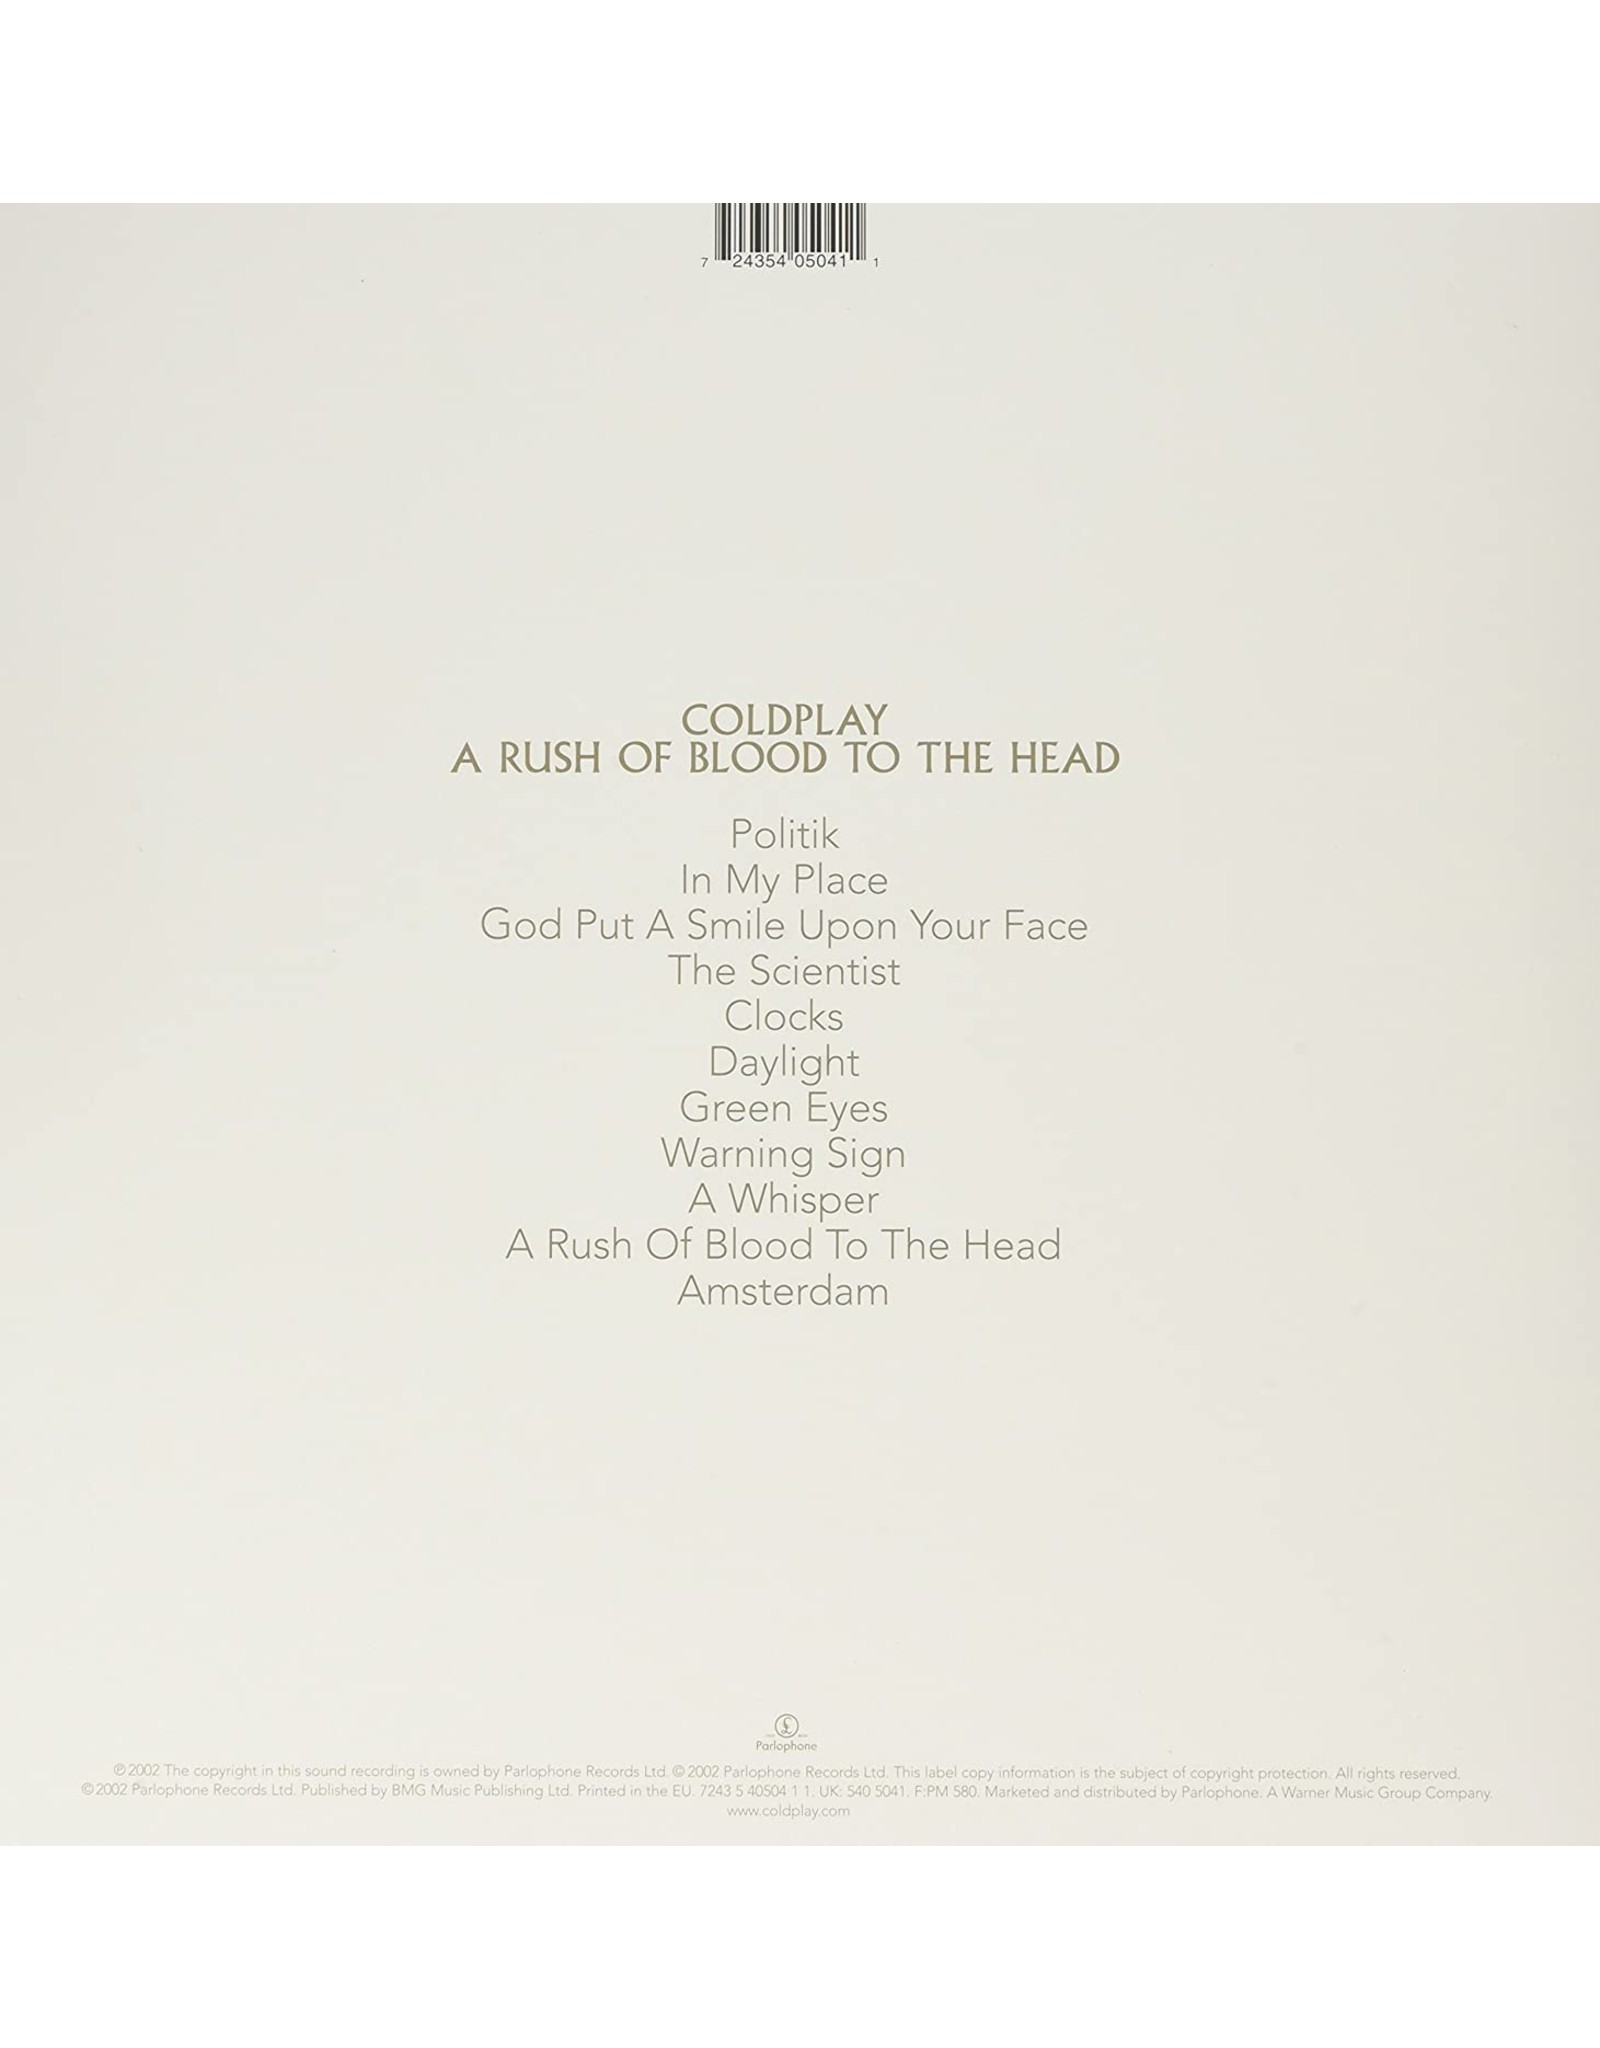 A Rush of Blood to the Head - Coldplay - Vinile